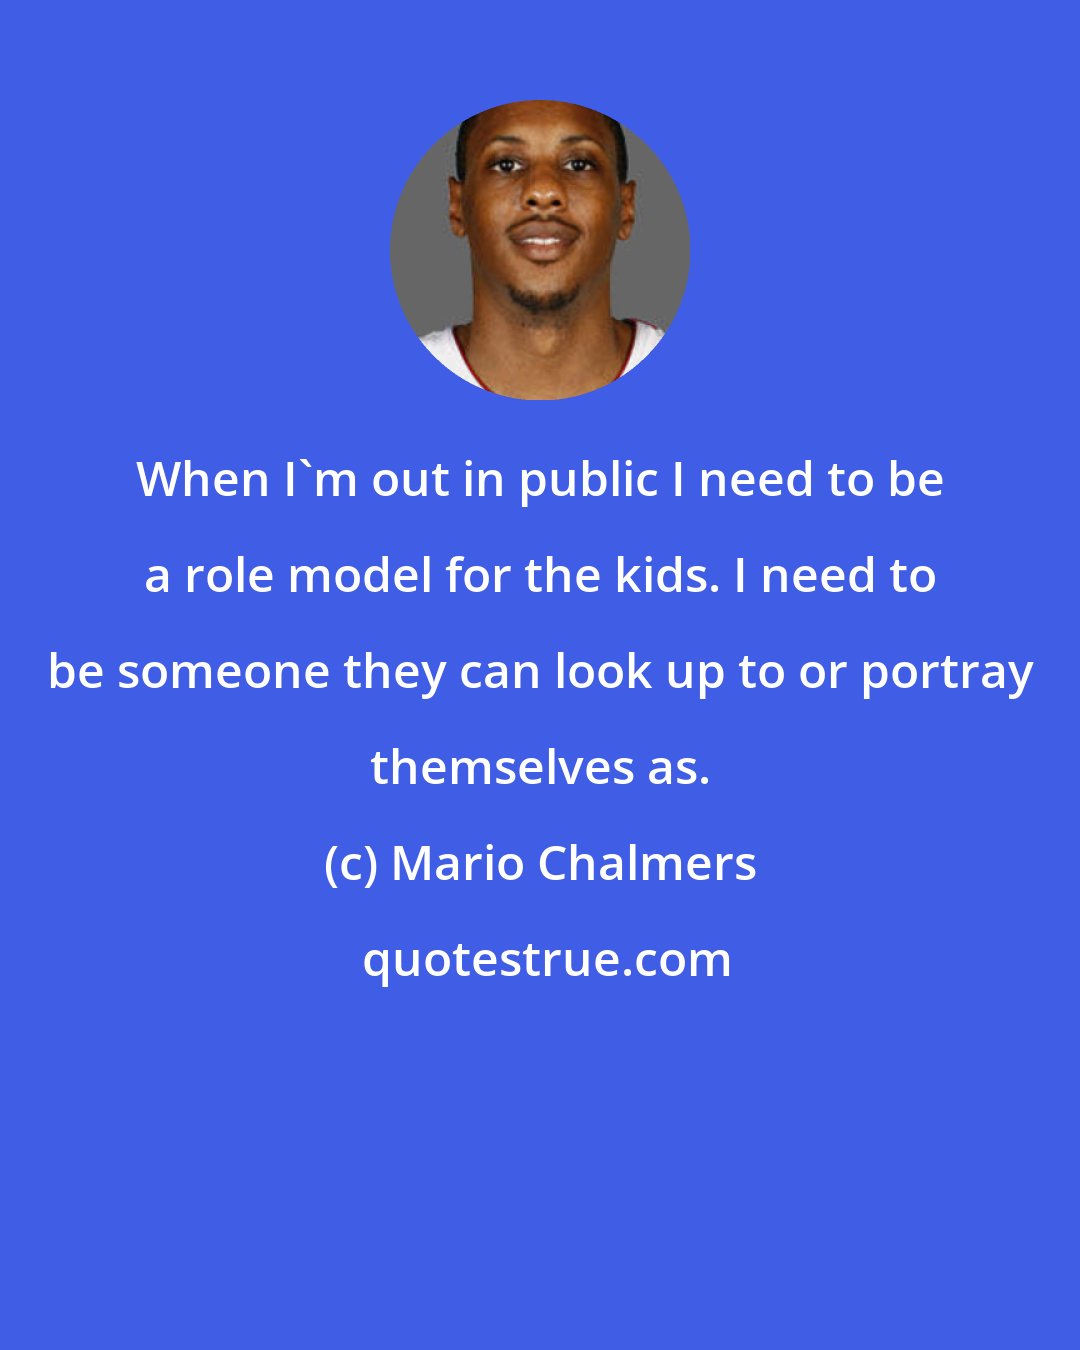 Mario Chalmers: When I'm out in public I need to be a role model for the kids. I need to be someone they can look up to or portray themselves as.